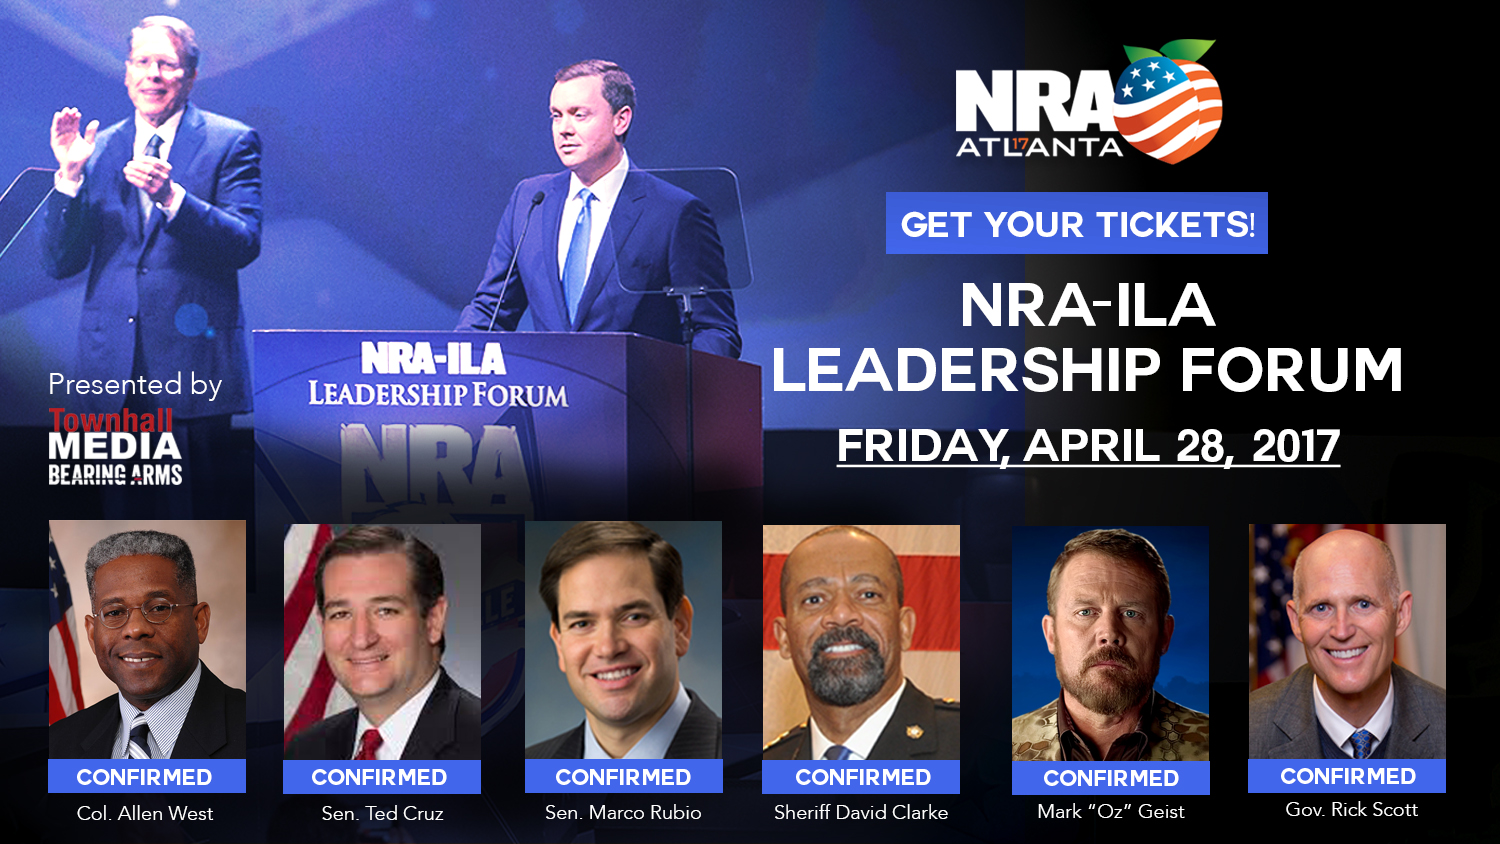 Join us on Friday, April 28, for the NRA ILA Leadership Forum!